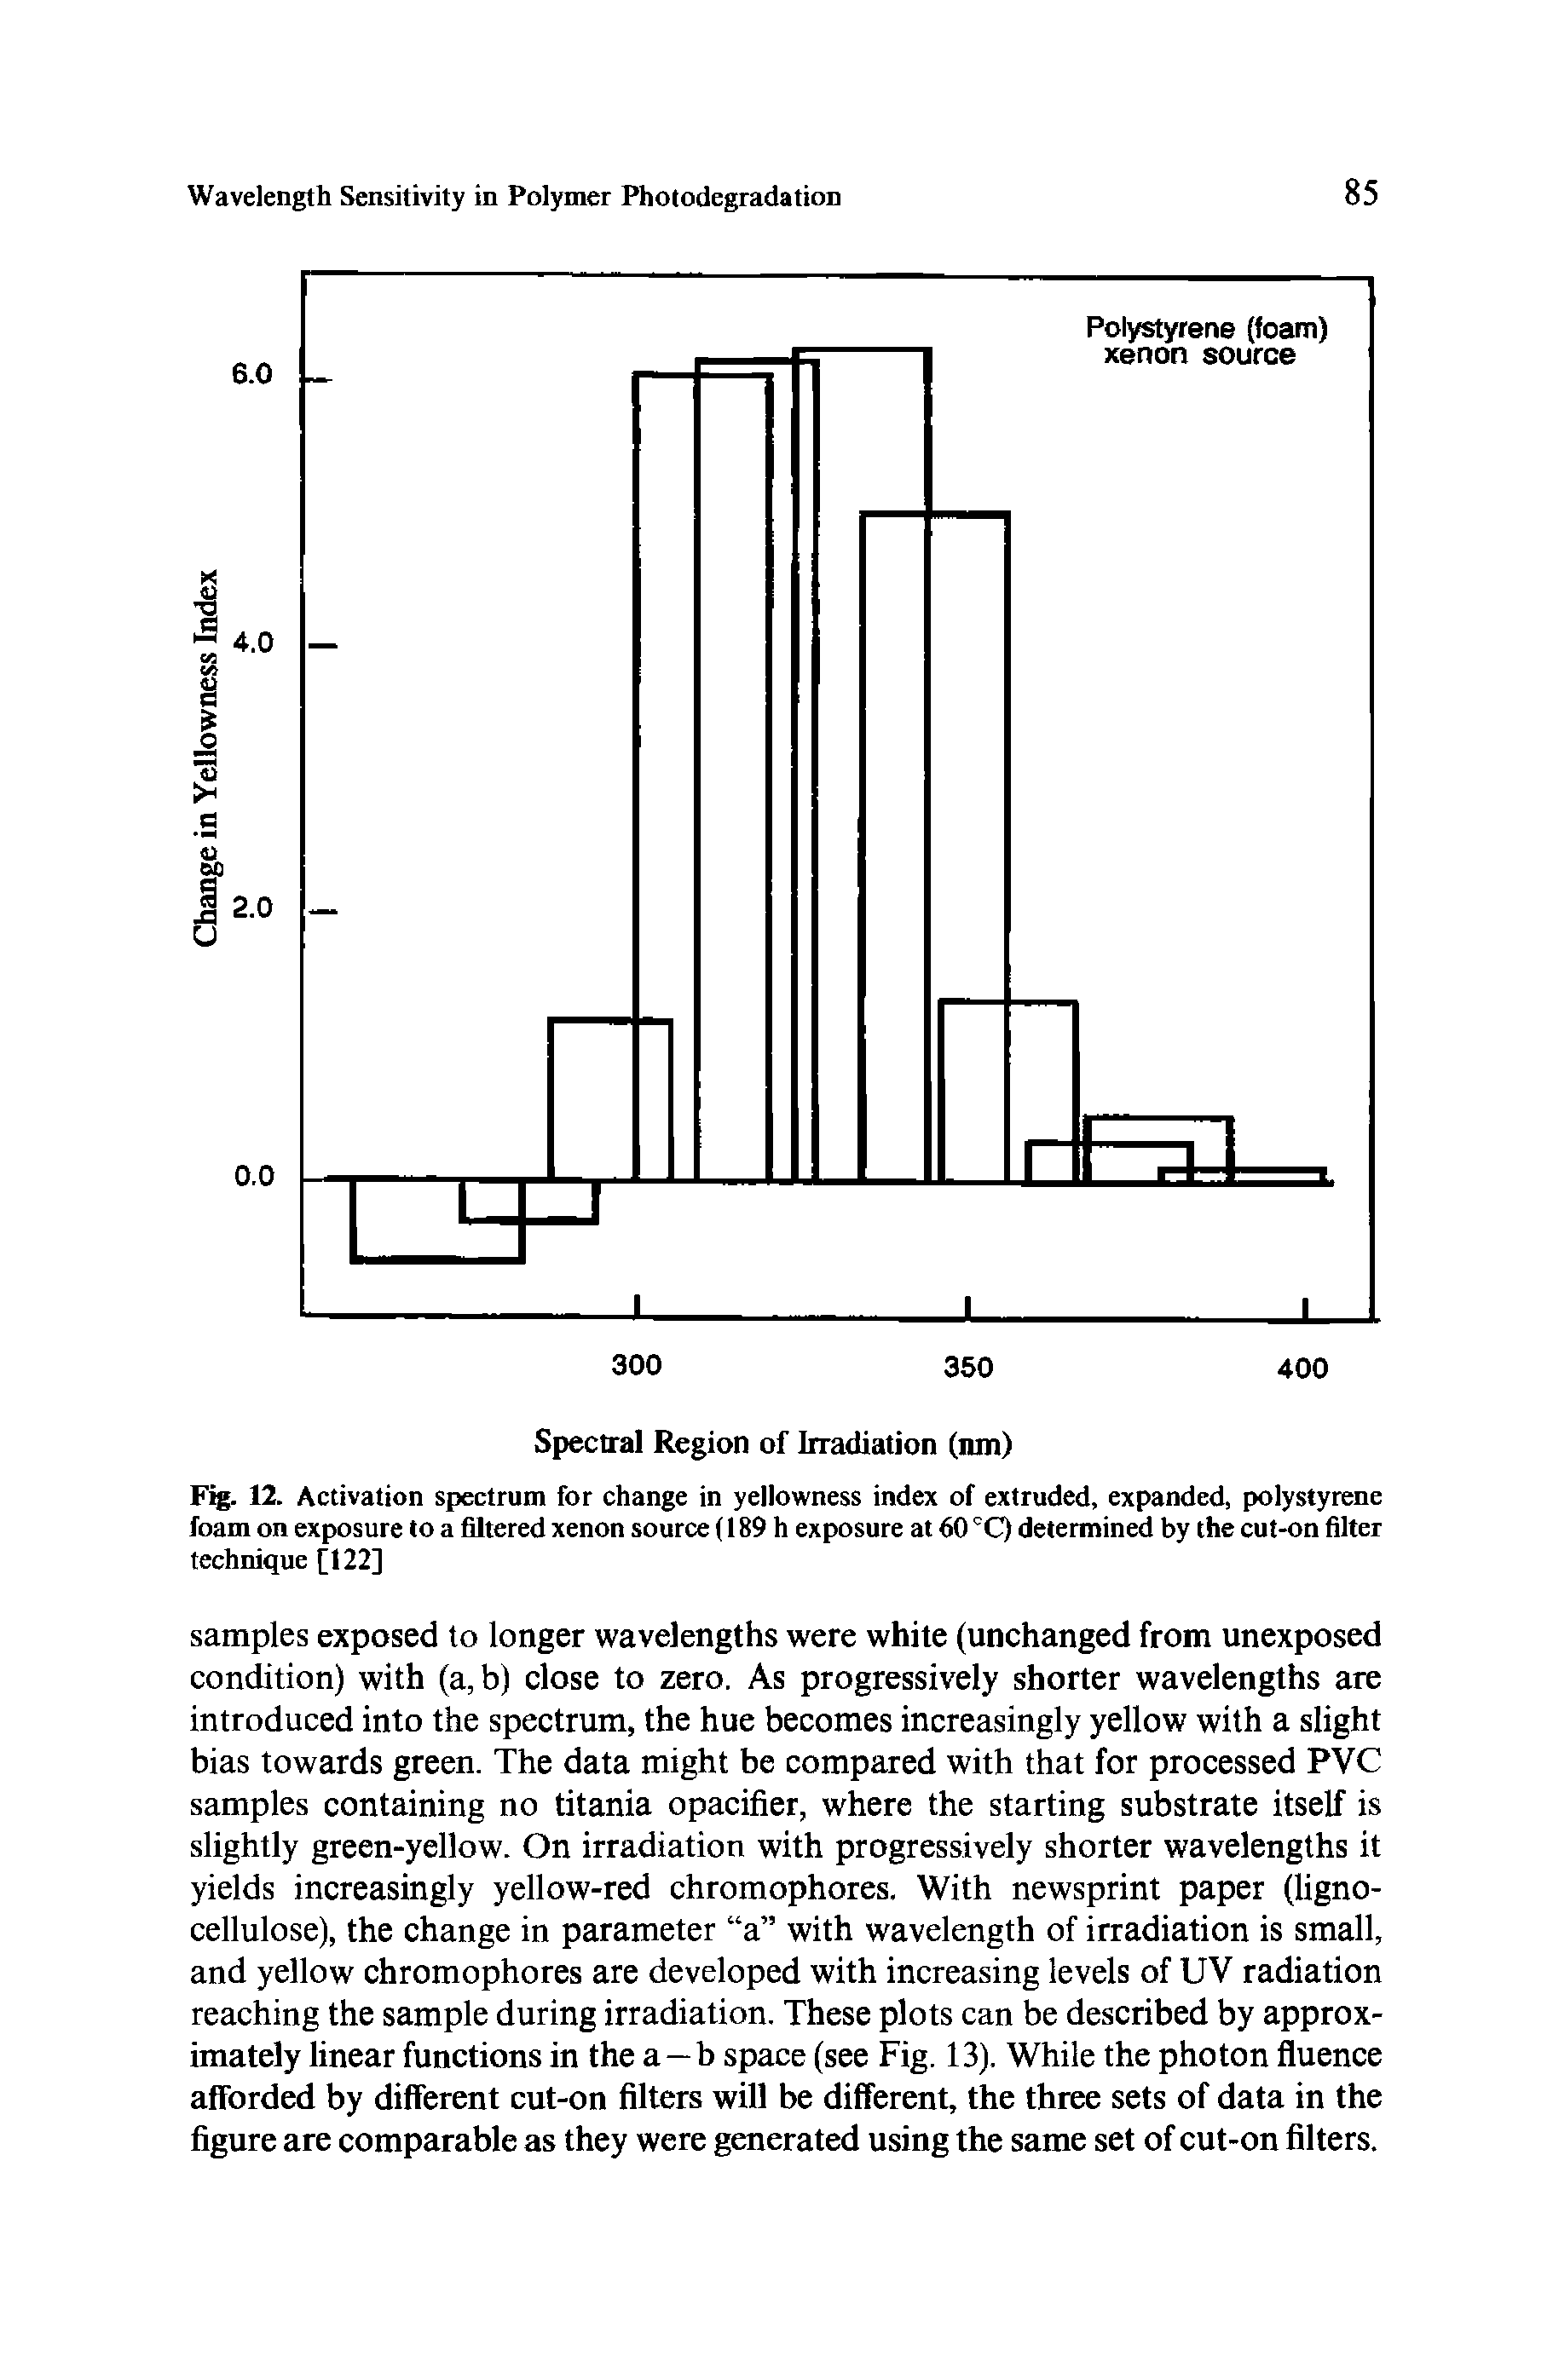 Fig. 12. Activation spectrum for change in yellowness index of extruded, expanded, polystyrene foam on exposure to a filtered xenon source (189 h exposure at 50 Q determin by the cut-on filter technique [122]...